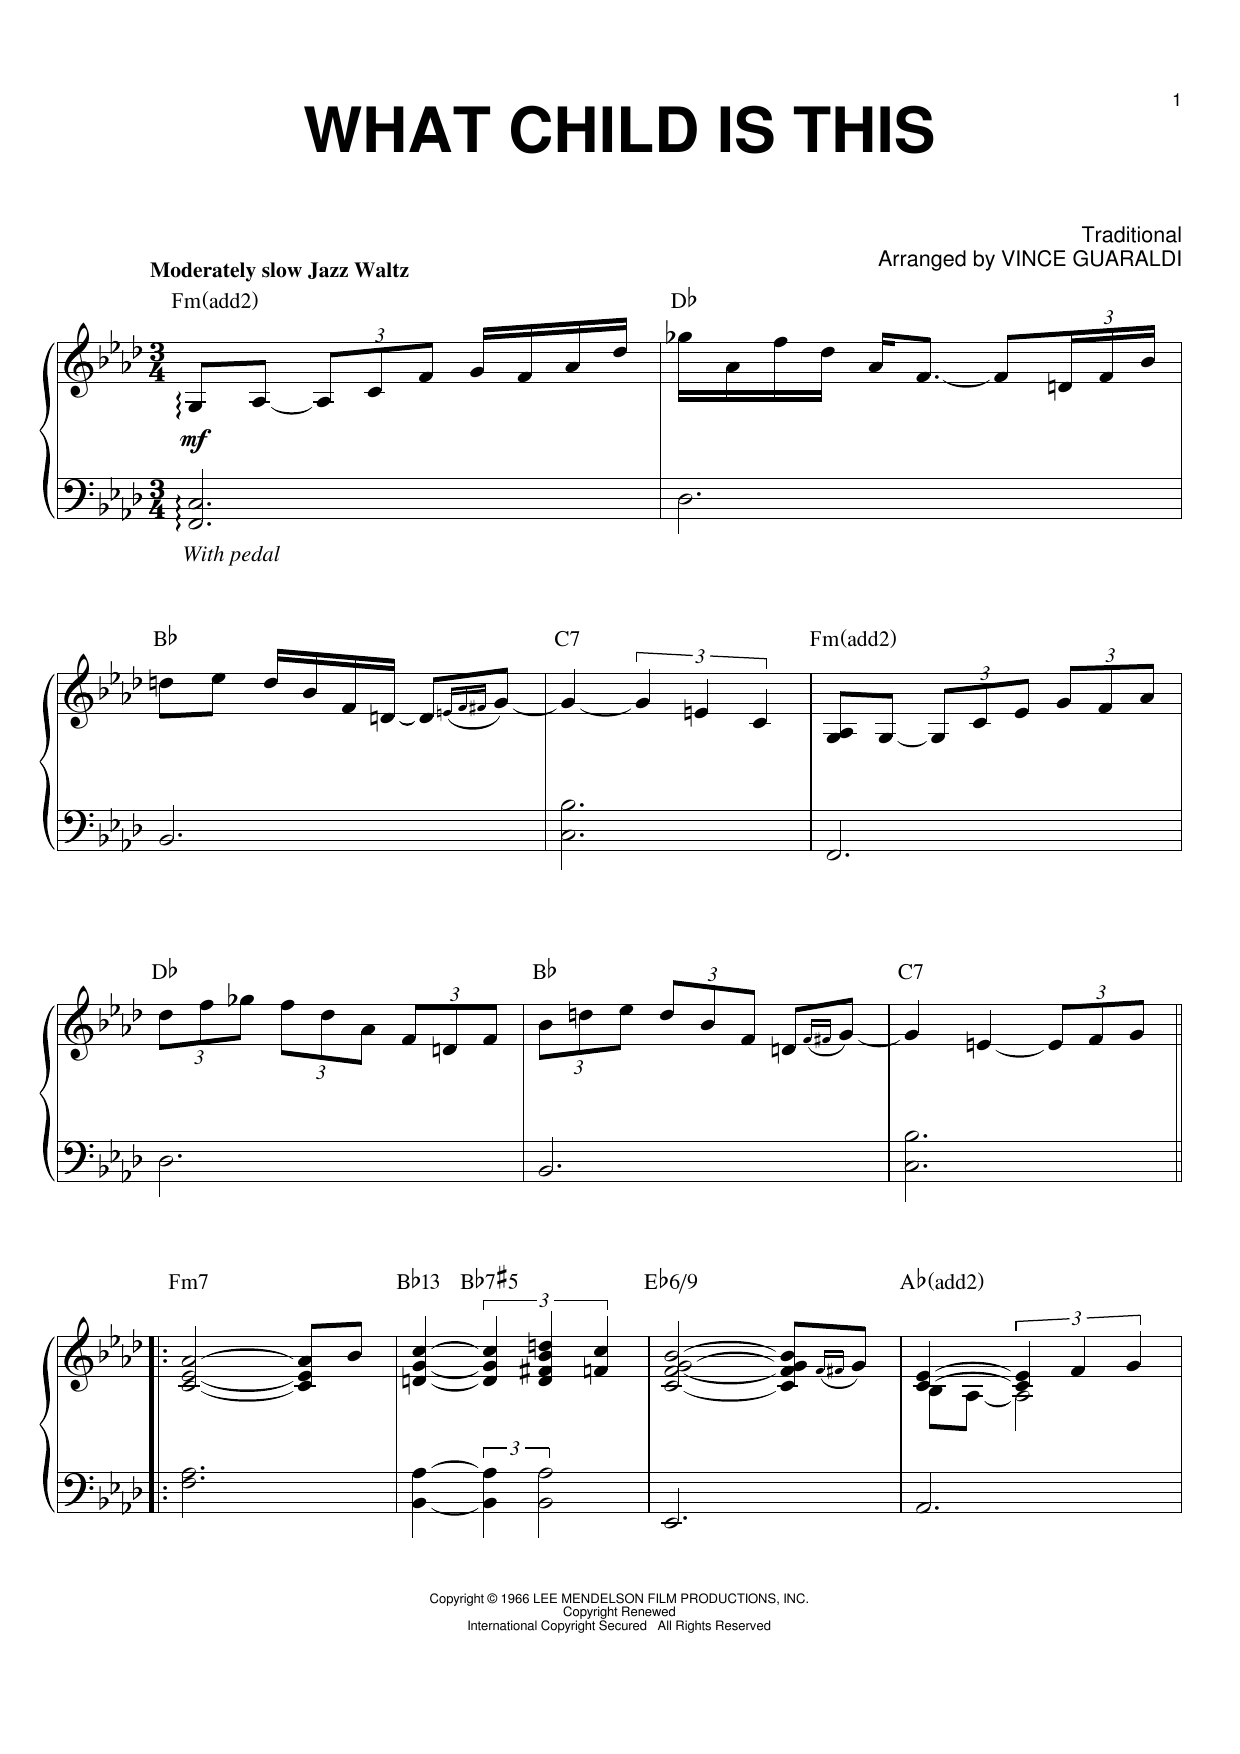 Download Vince Guaraldi What Child Is This Sheet Music